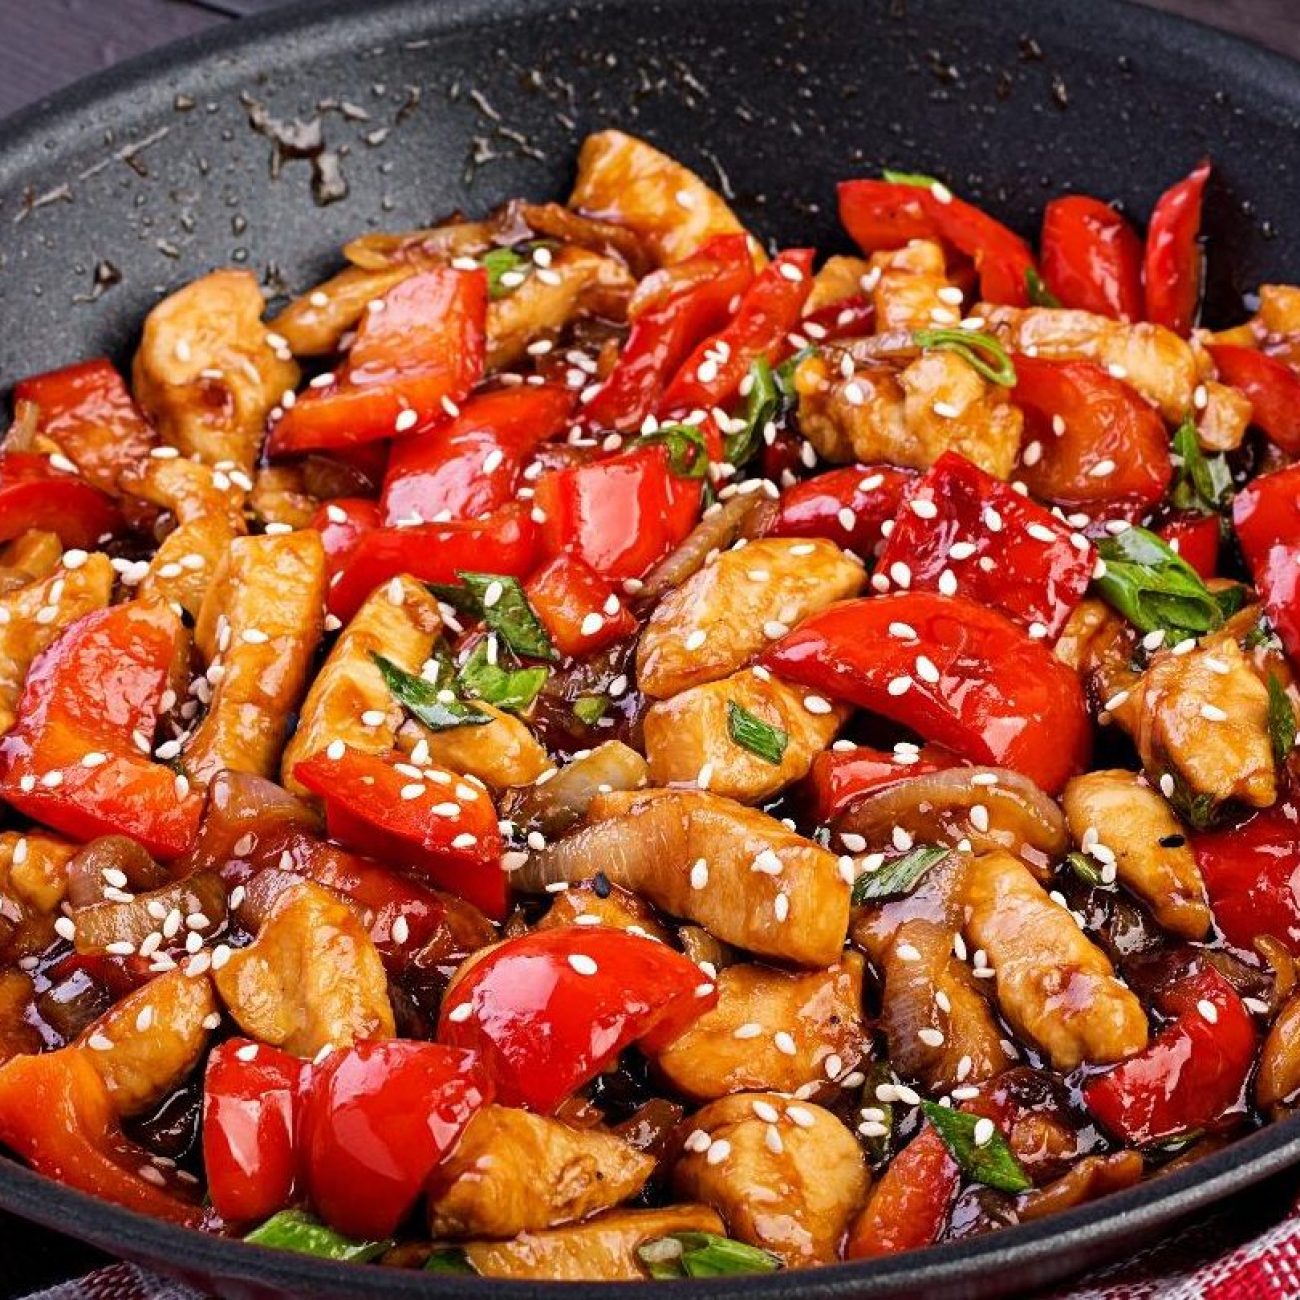 Sizzling Red Bell Pepper and Chicken Breast Stir-Fry Recipe